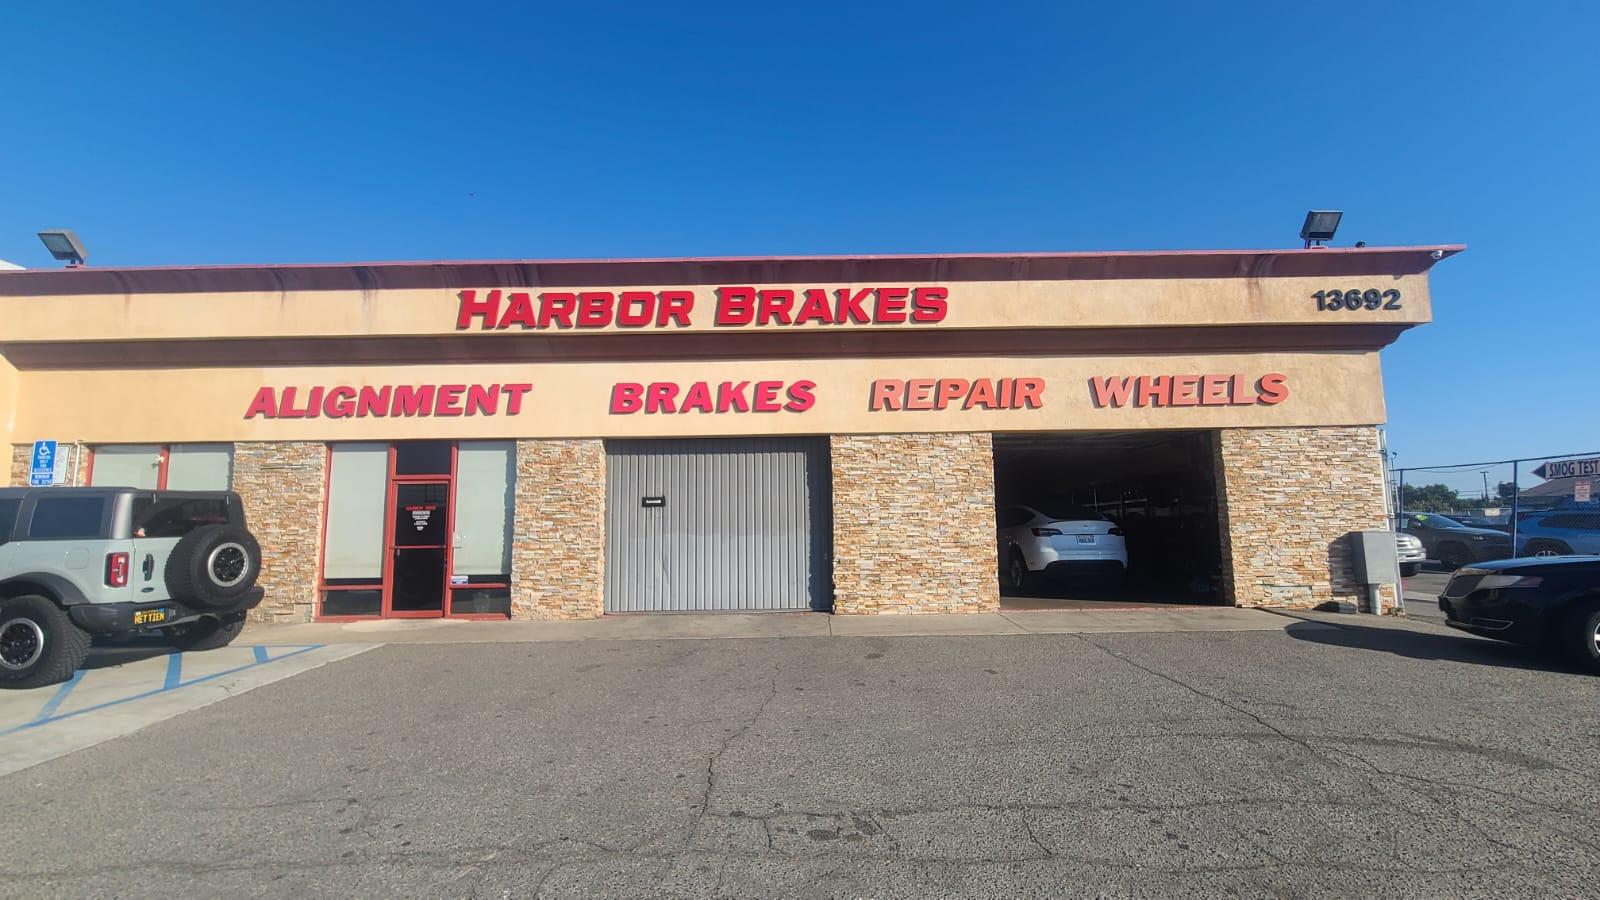 Image of the harbor brake business